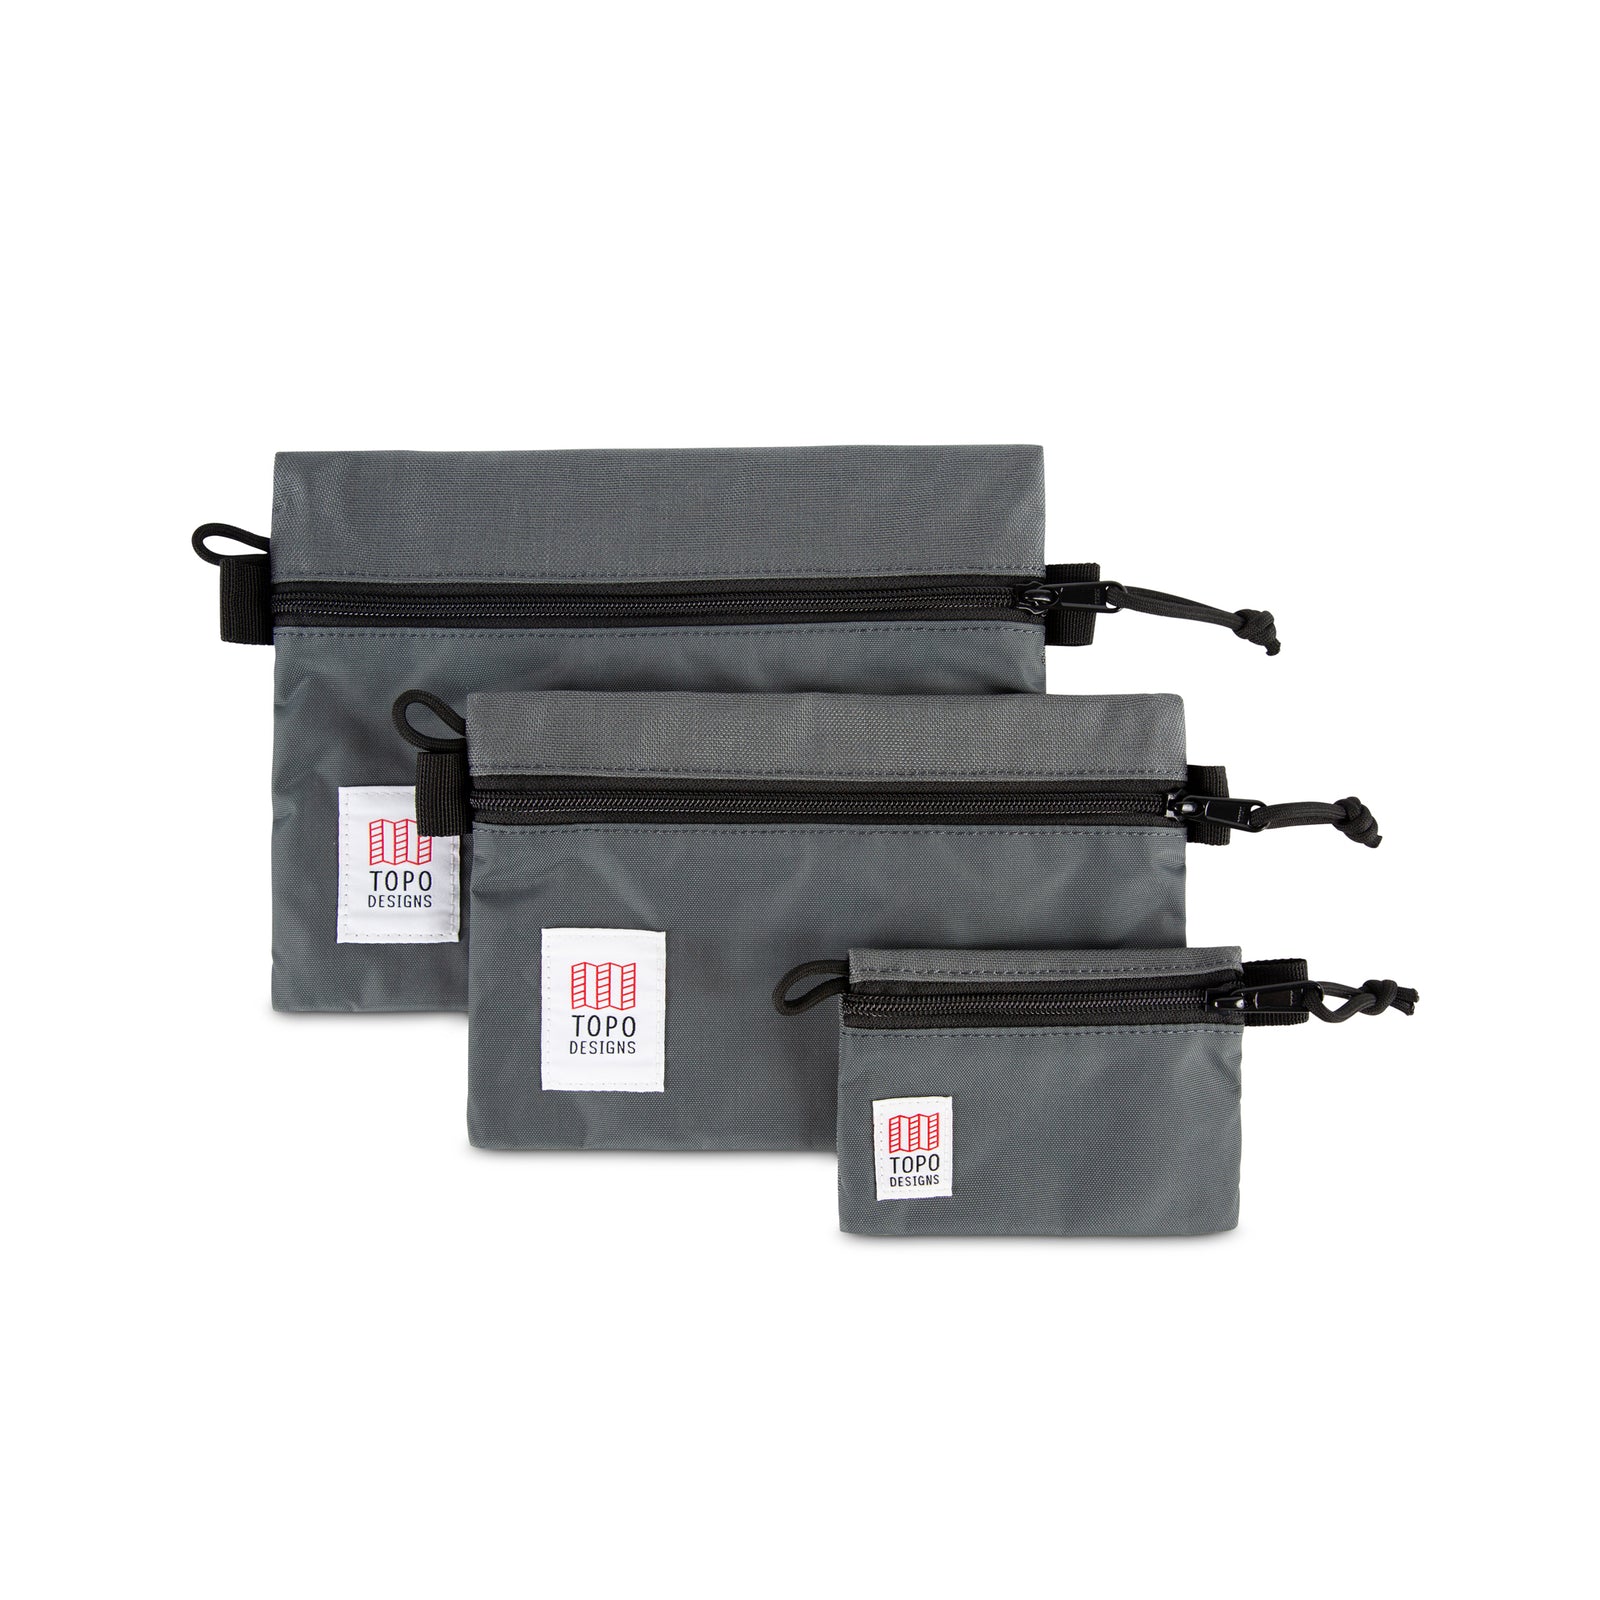 Topo Designs Accessory Bags - product shot of the "Medium", "Small", and "Micro" accessory bags in "Charcoal - Recycled" "Charcoal" gray.